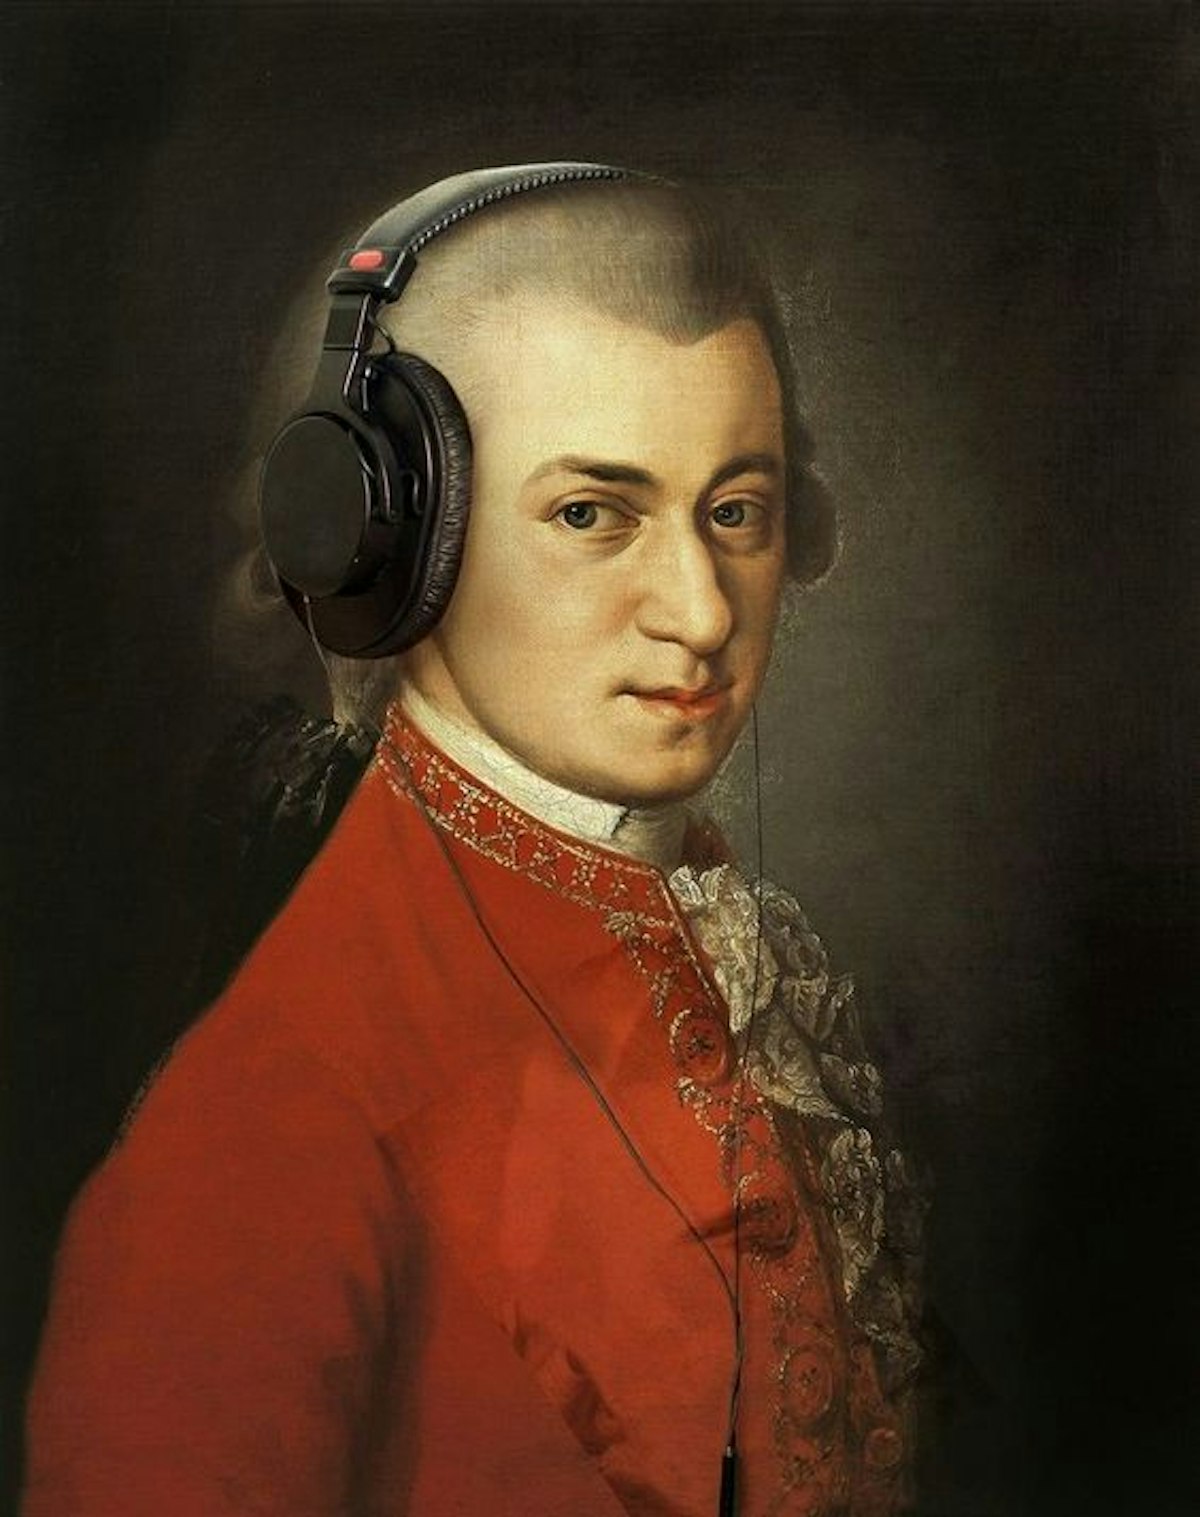 featured image - Discovering the Genius of Wolfgang Amadeus Mozart through the Lens of Mental Health